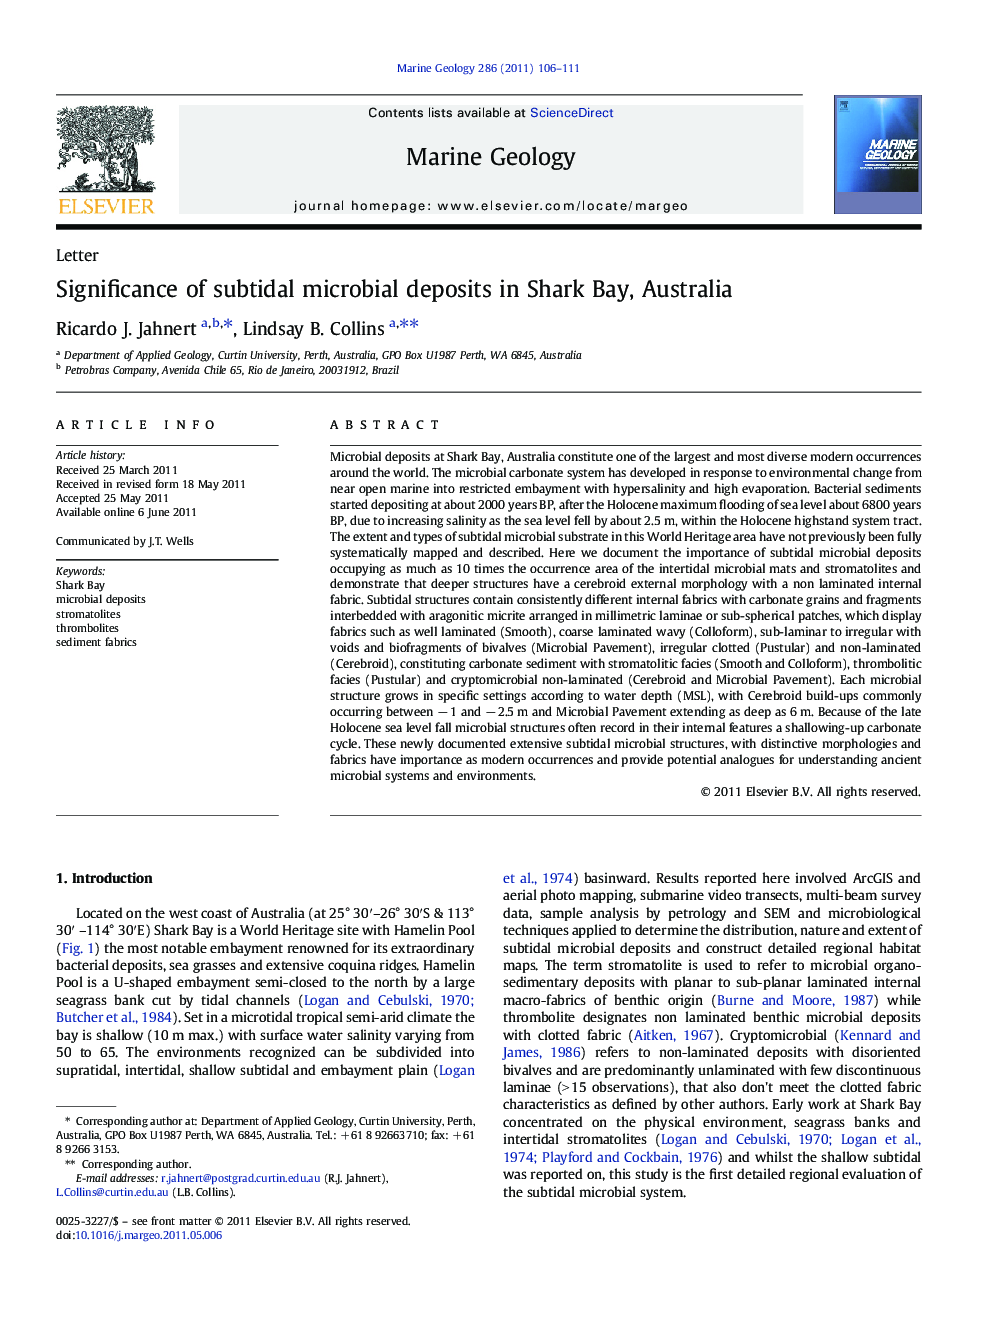 Significance of subtidal microbial deposits in Shark Bay, Australia